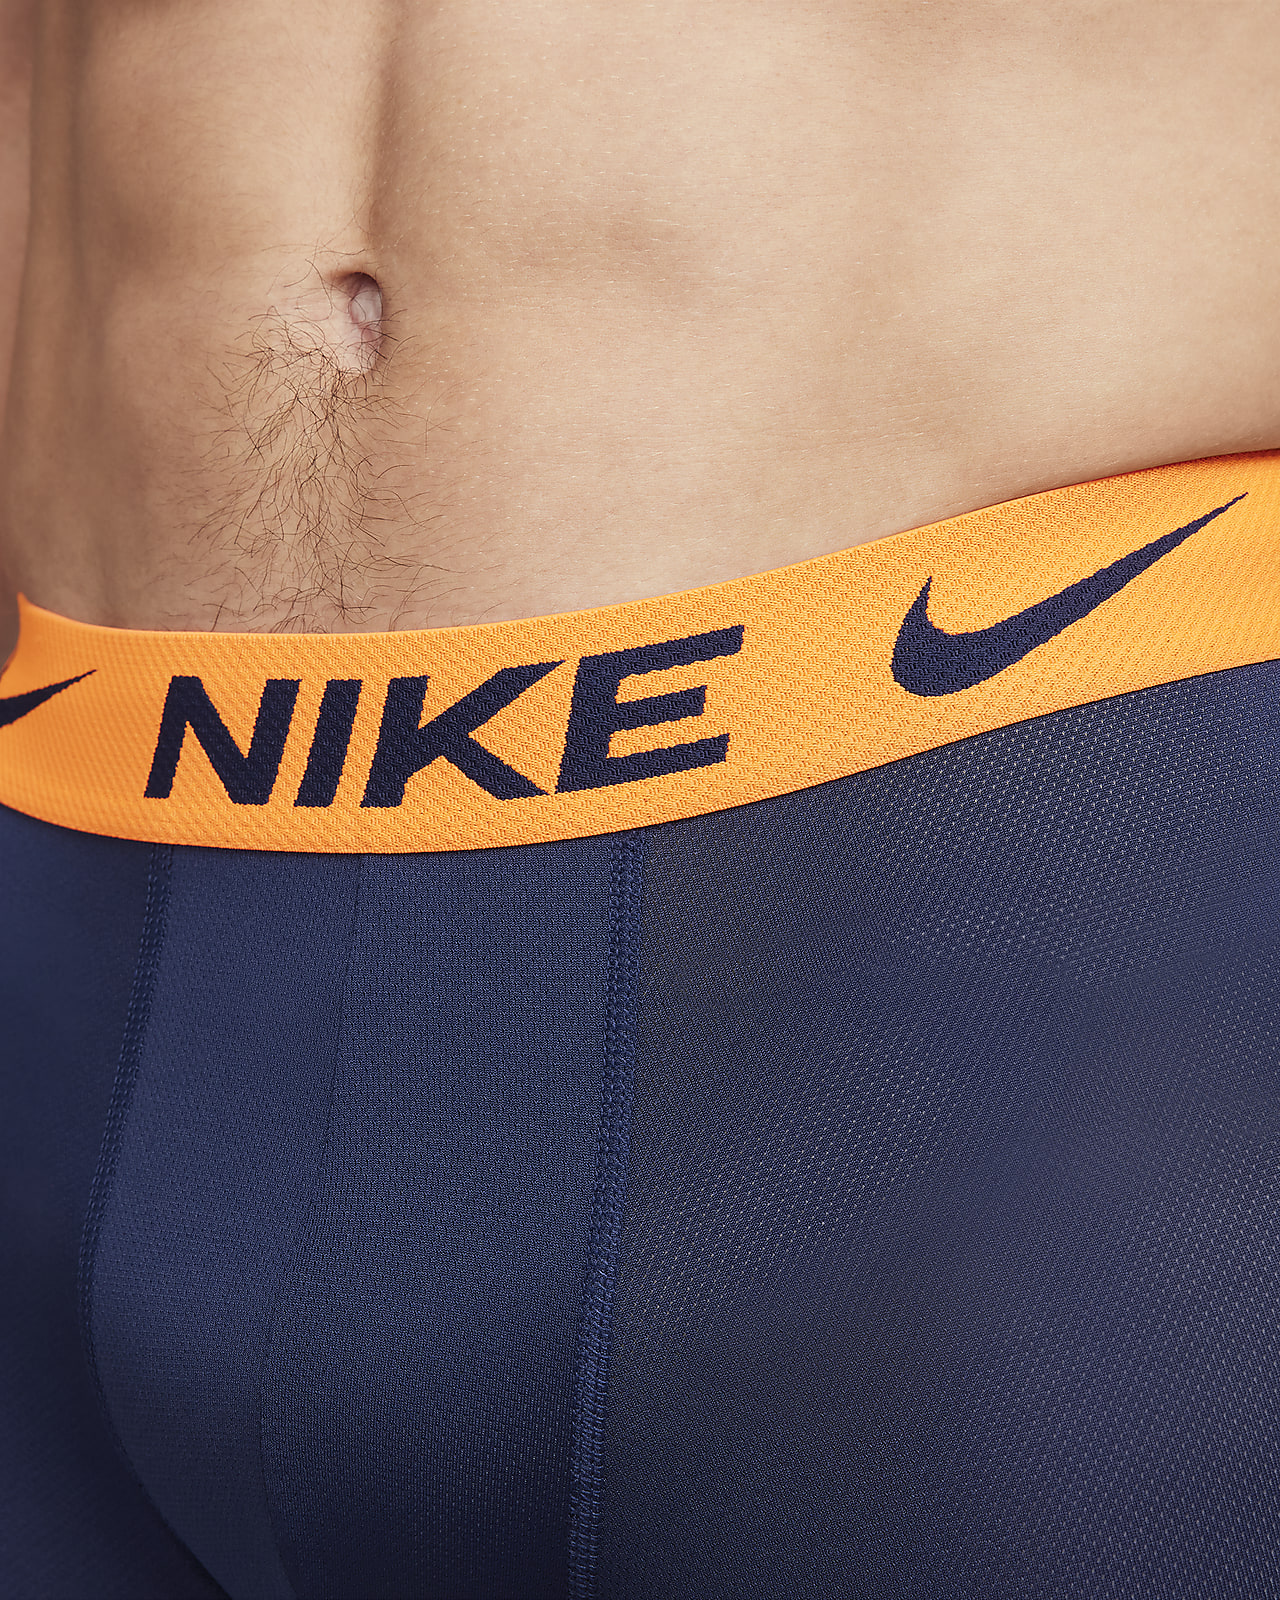 Nike Dri Fit Underwear Product Details and Info